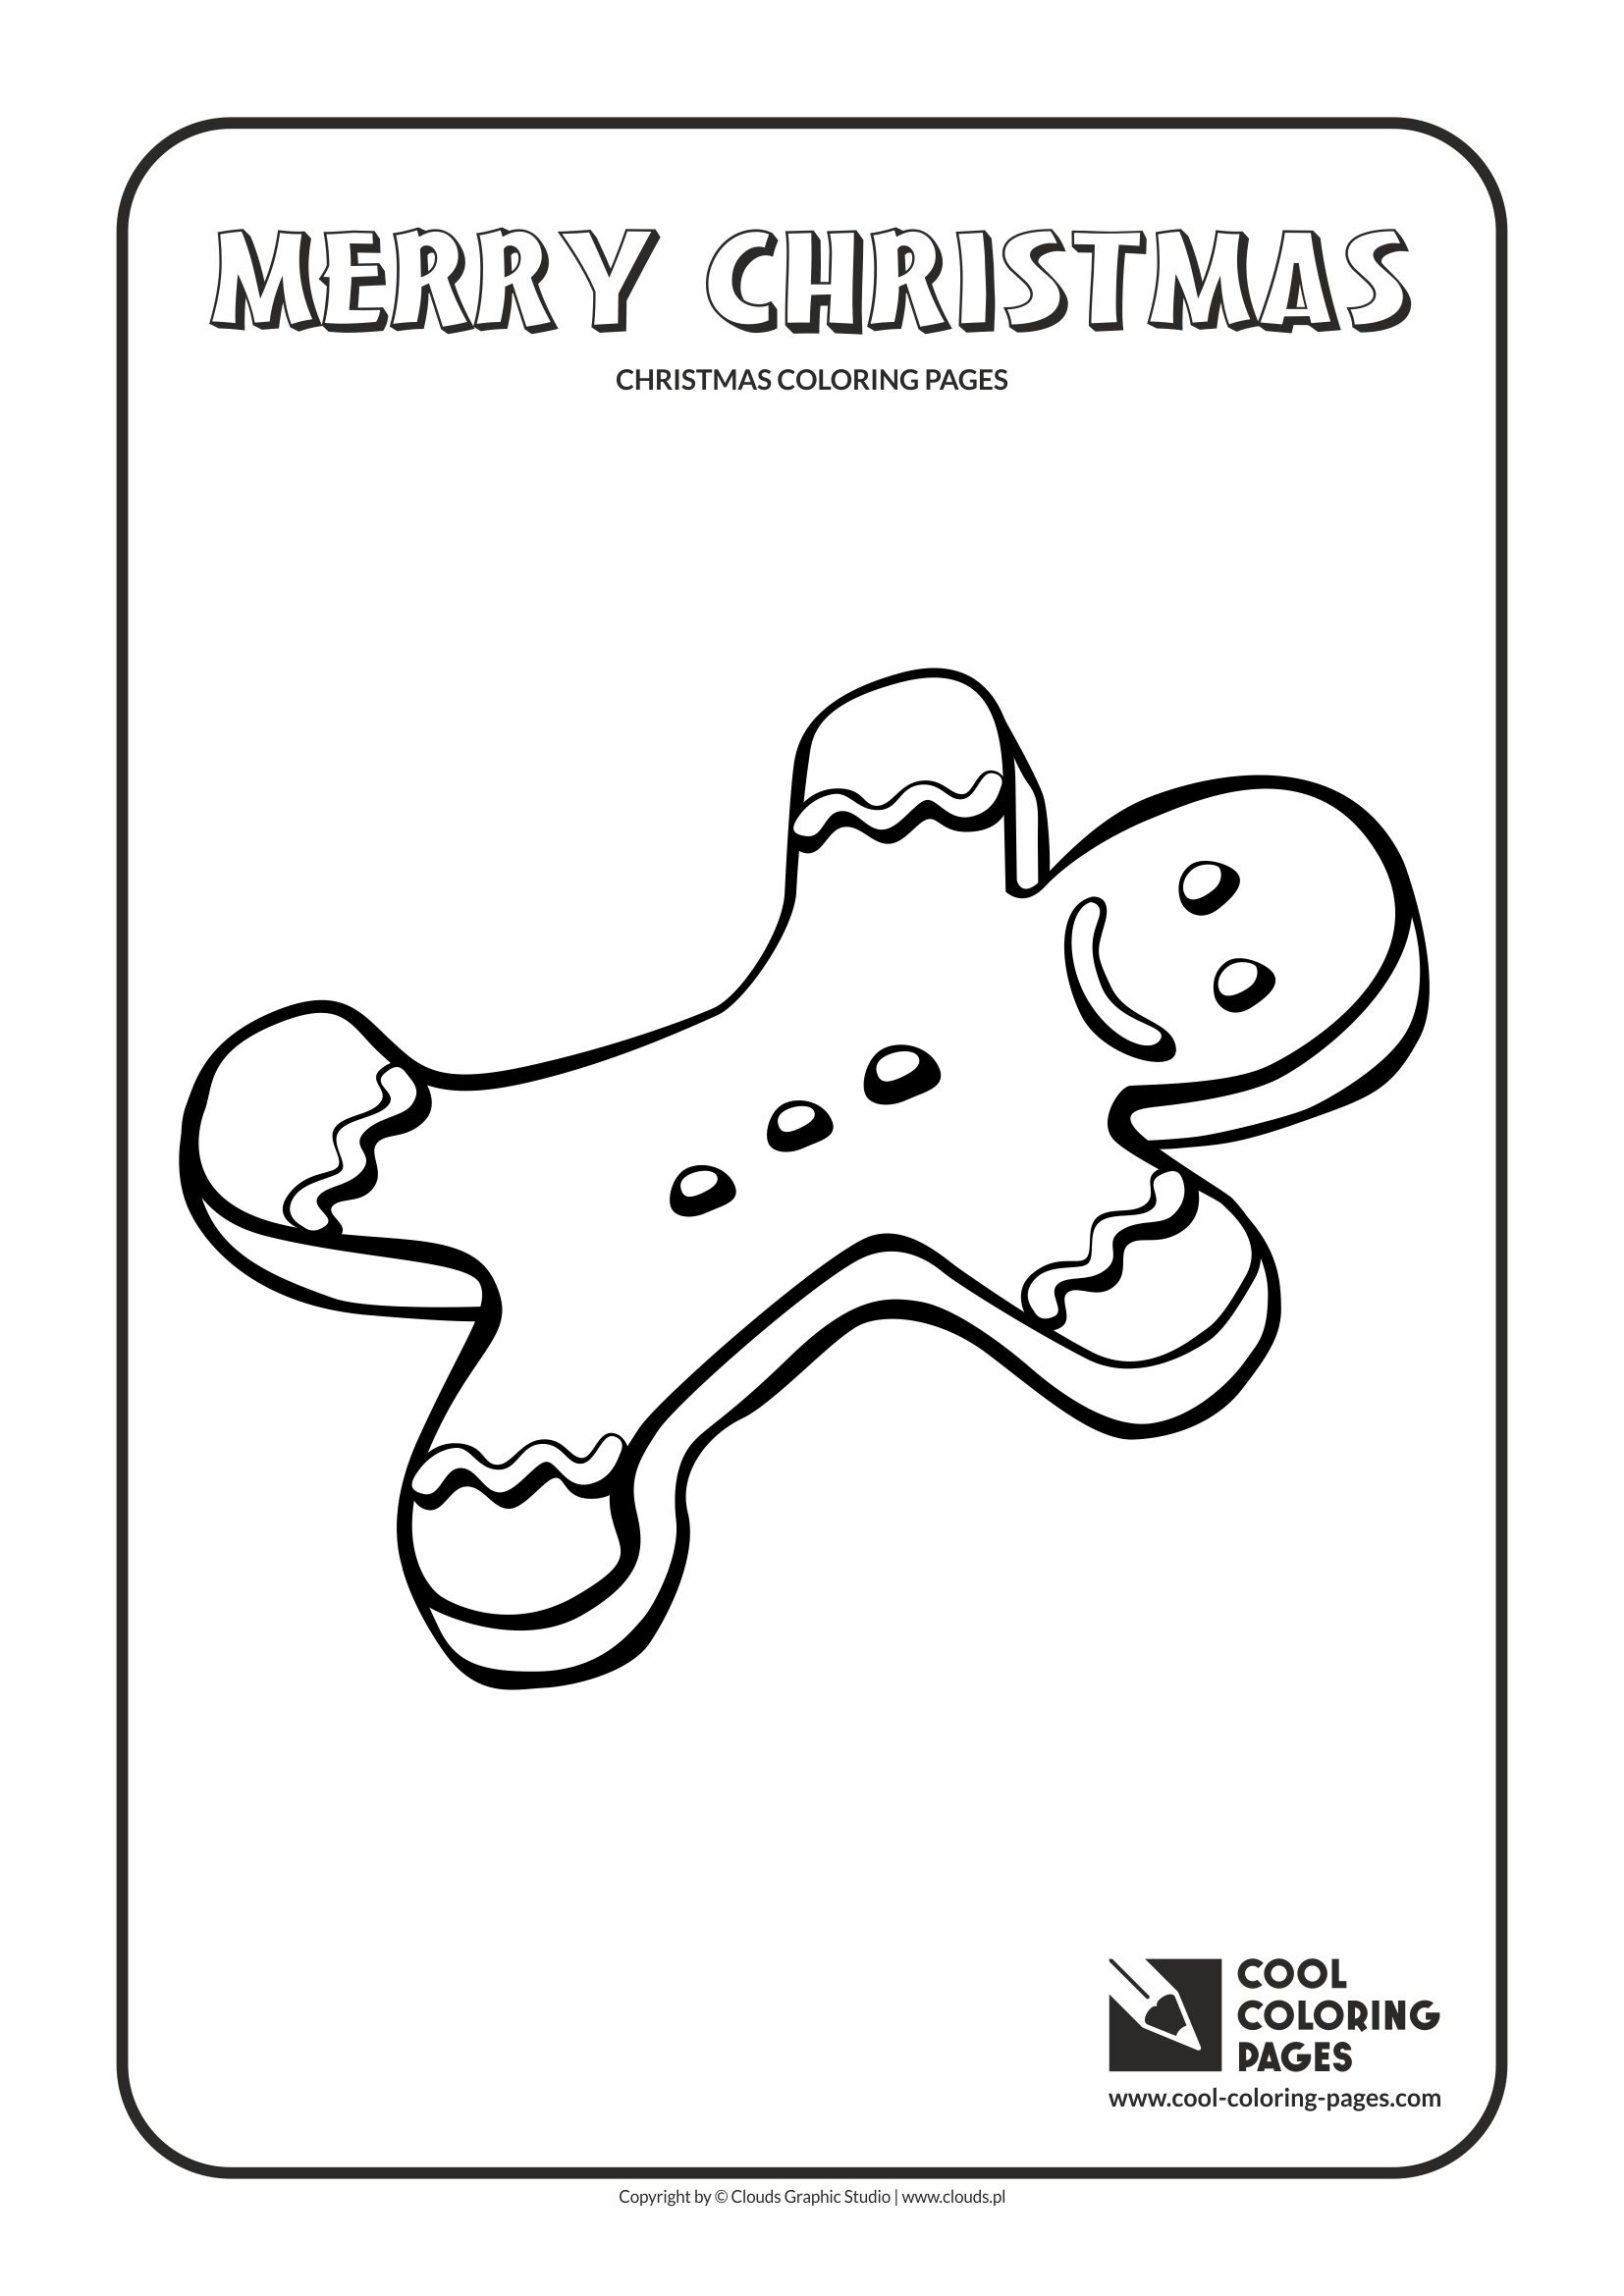 Cool Coloring Pages - Holidays / Gingerbread man / Coloring page with Gingerbread man